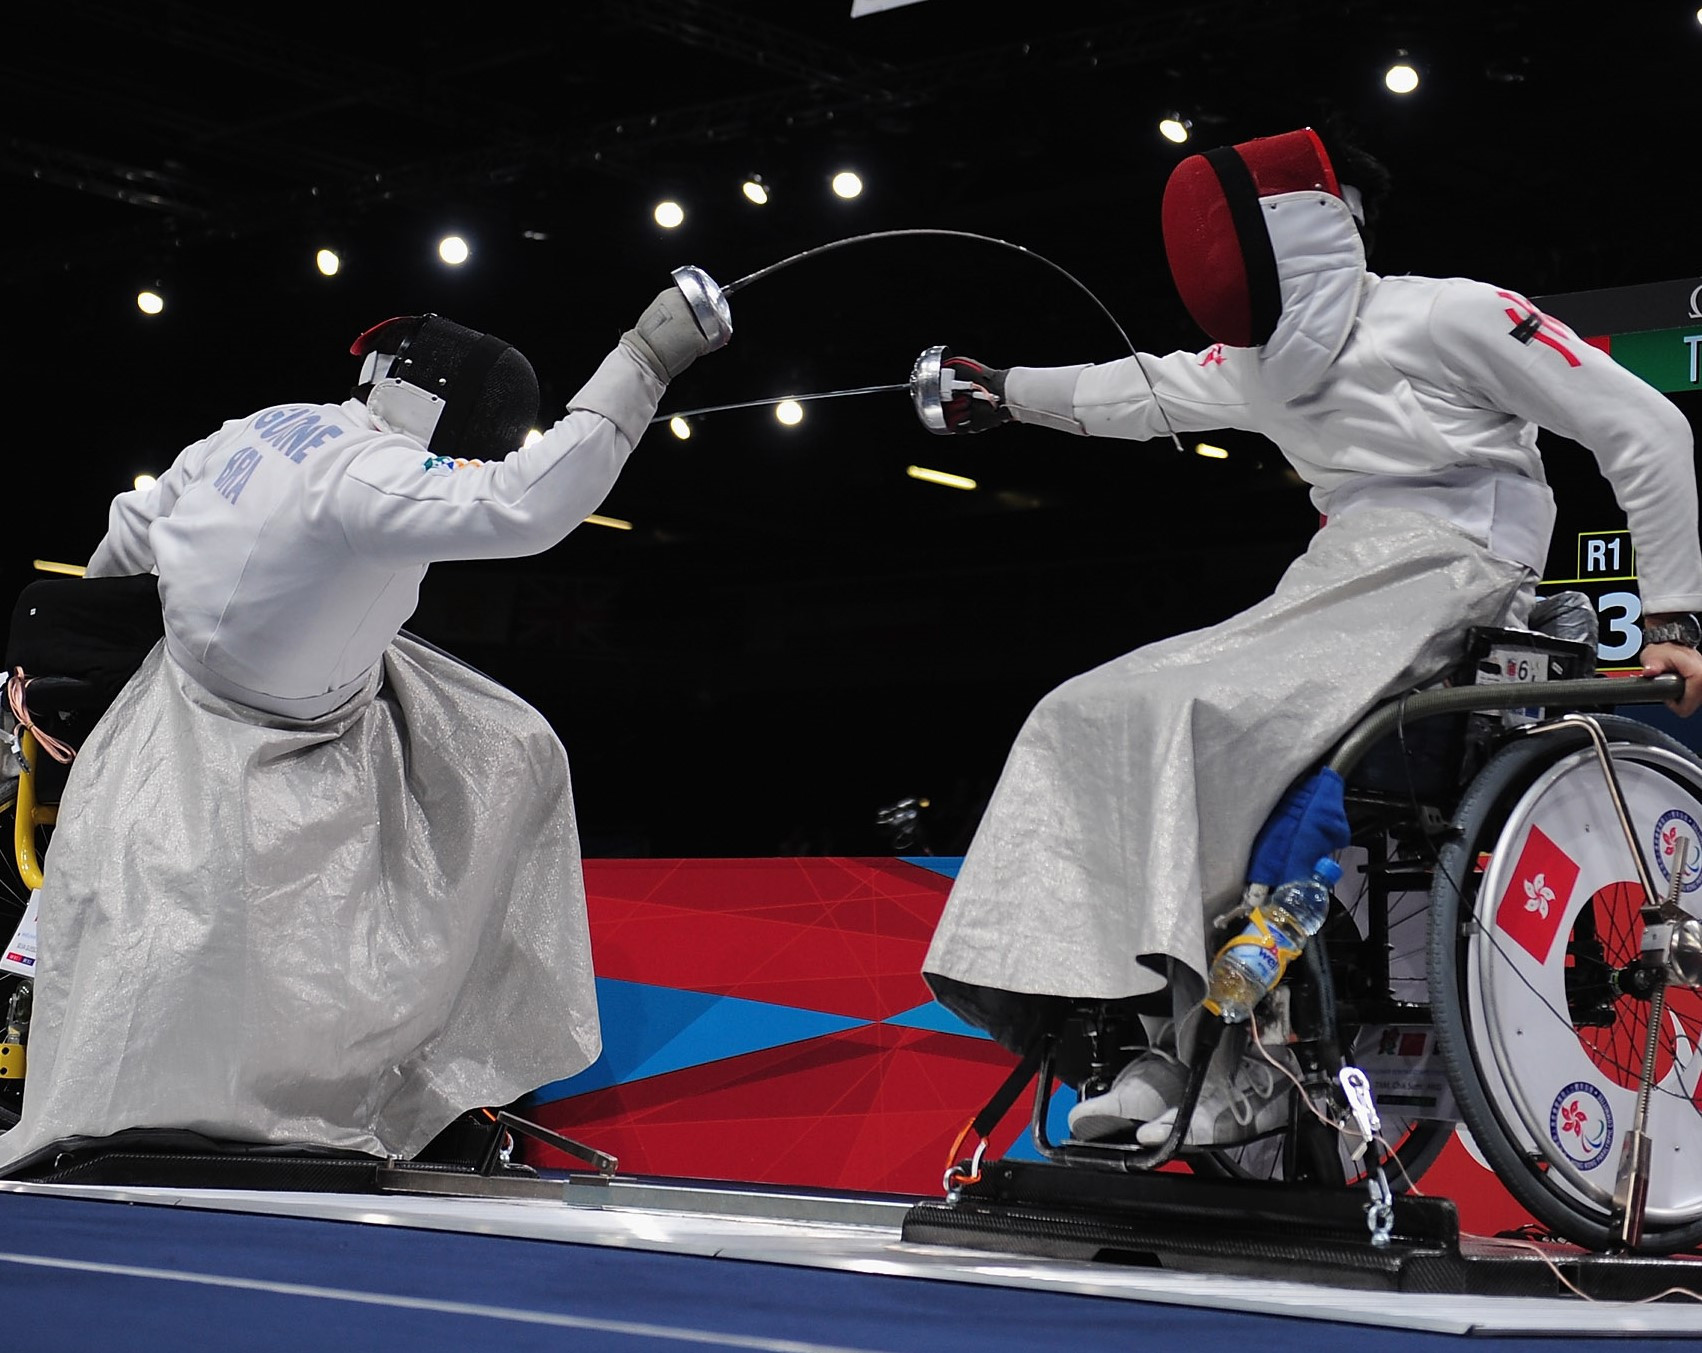 The IWAS Under-17 and Under-23 World Fencing Championships are set to take place in São Paulo in October ©Getty Images